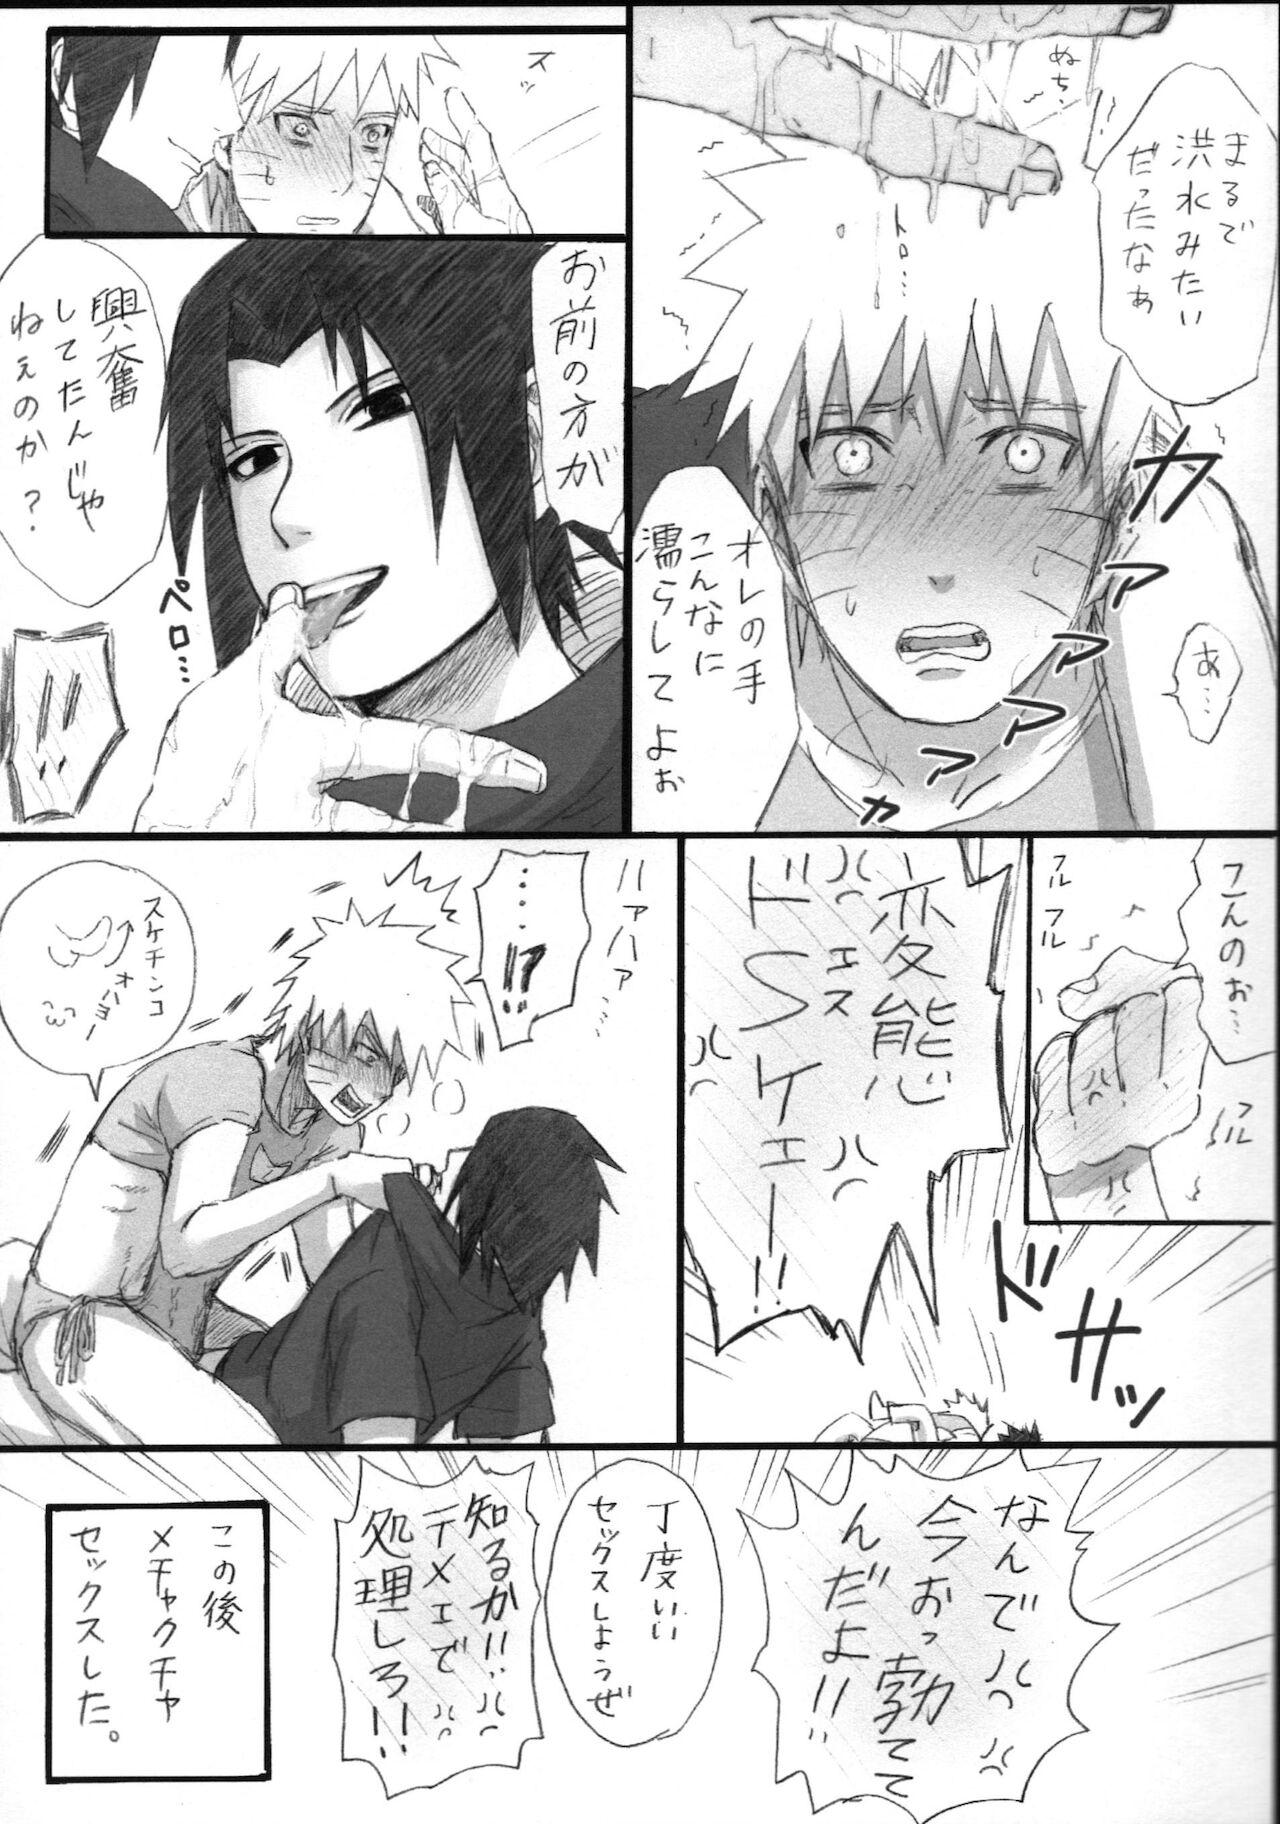 Gostoso Love Infection Nver. - Naruto Glamour Porn - Page 8